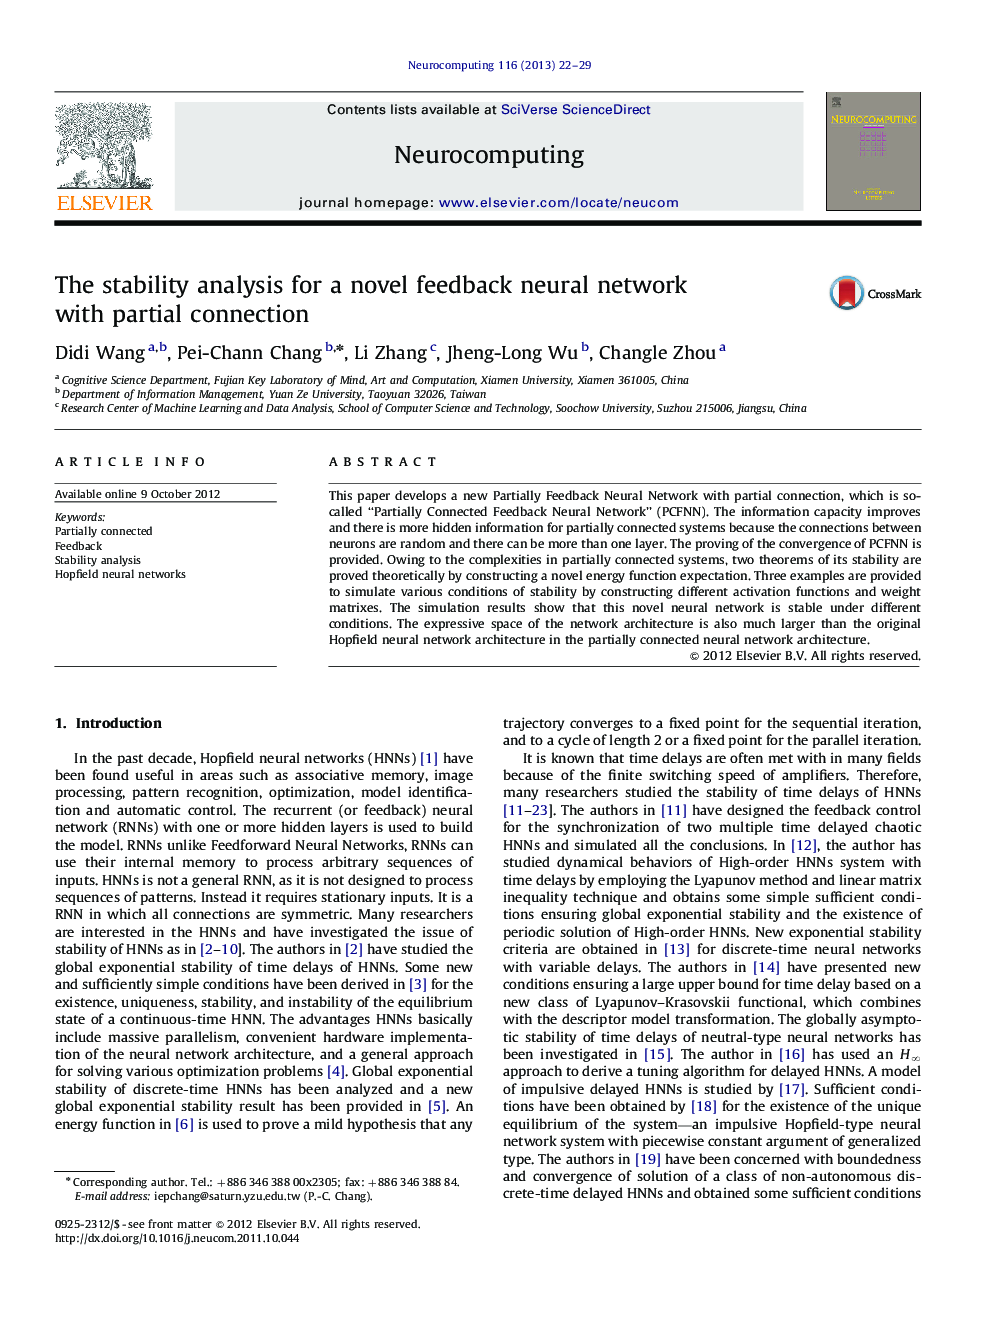 The stability analysis for a novel feedback neural network with partial connection